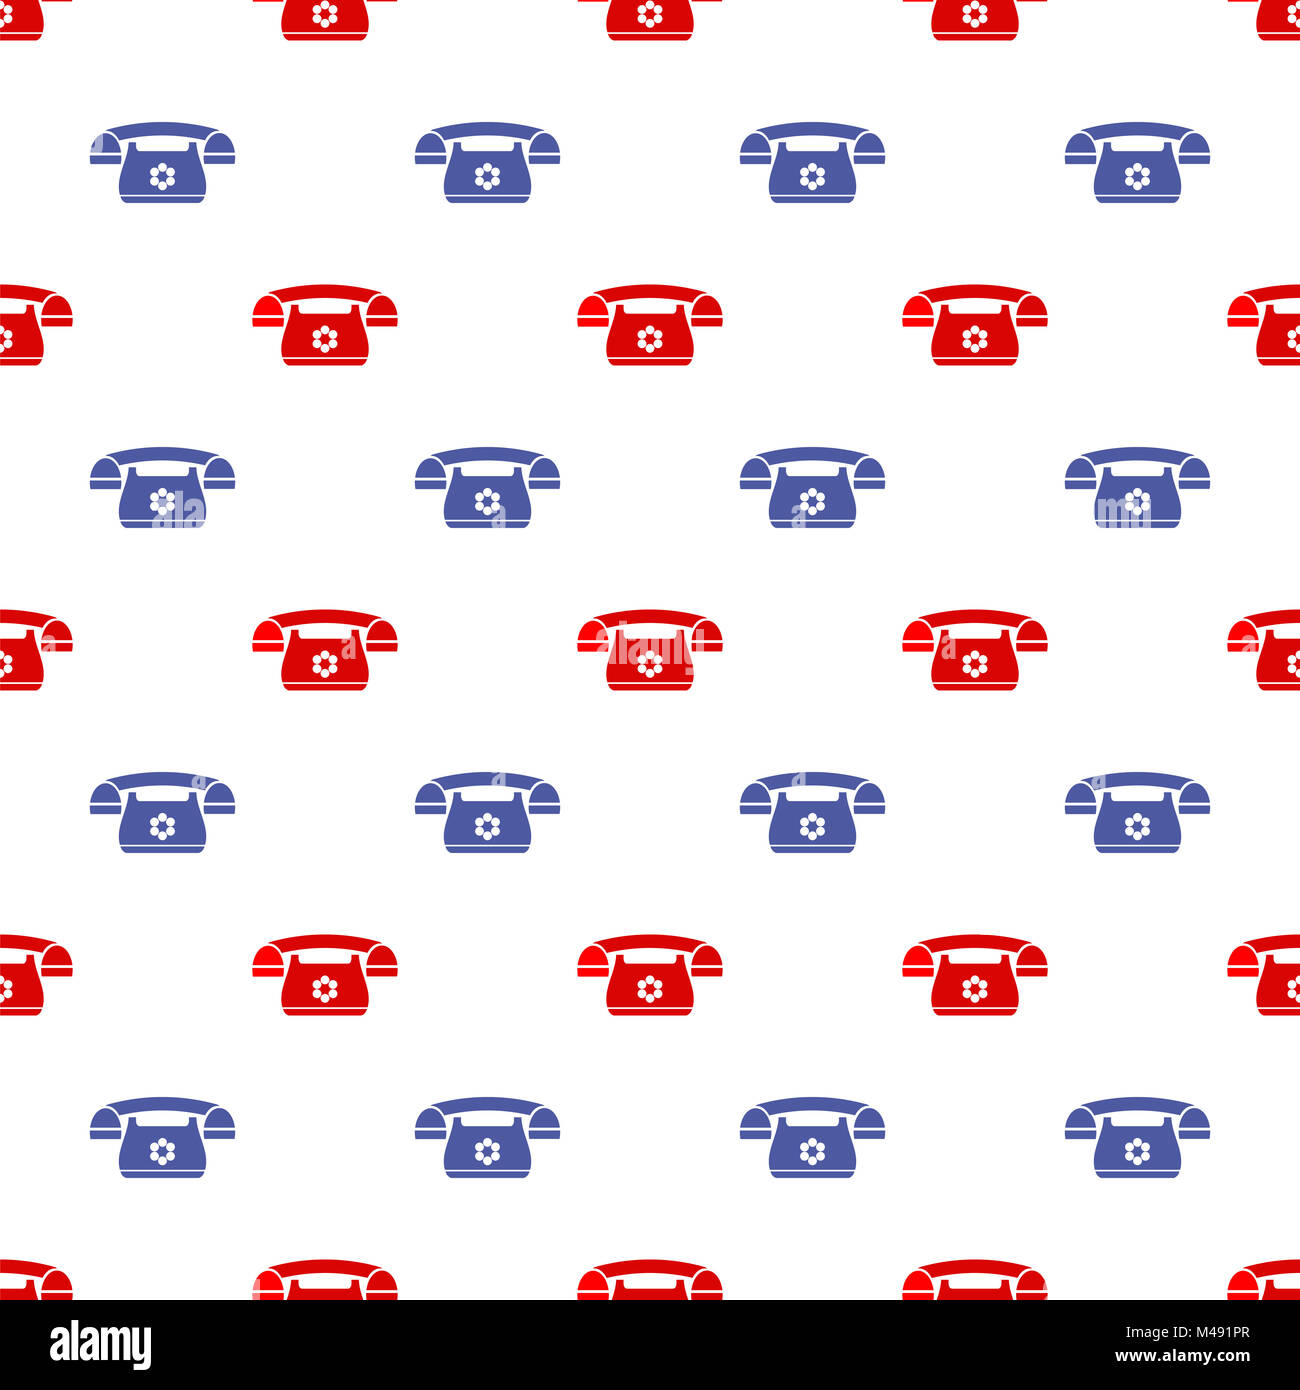 Retro Phone Pattern. Silhouette of Old Telephone Stock Photo